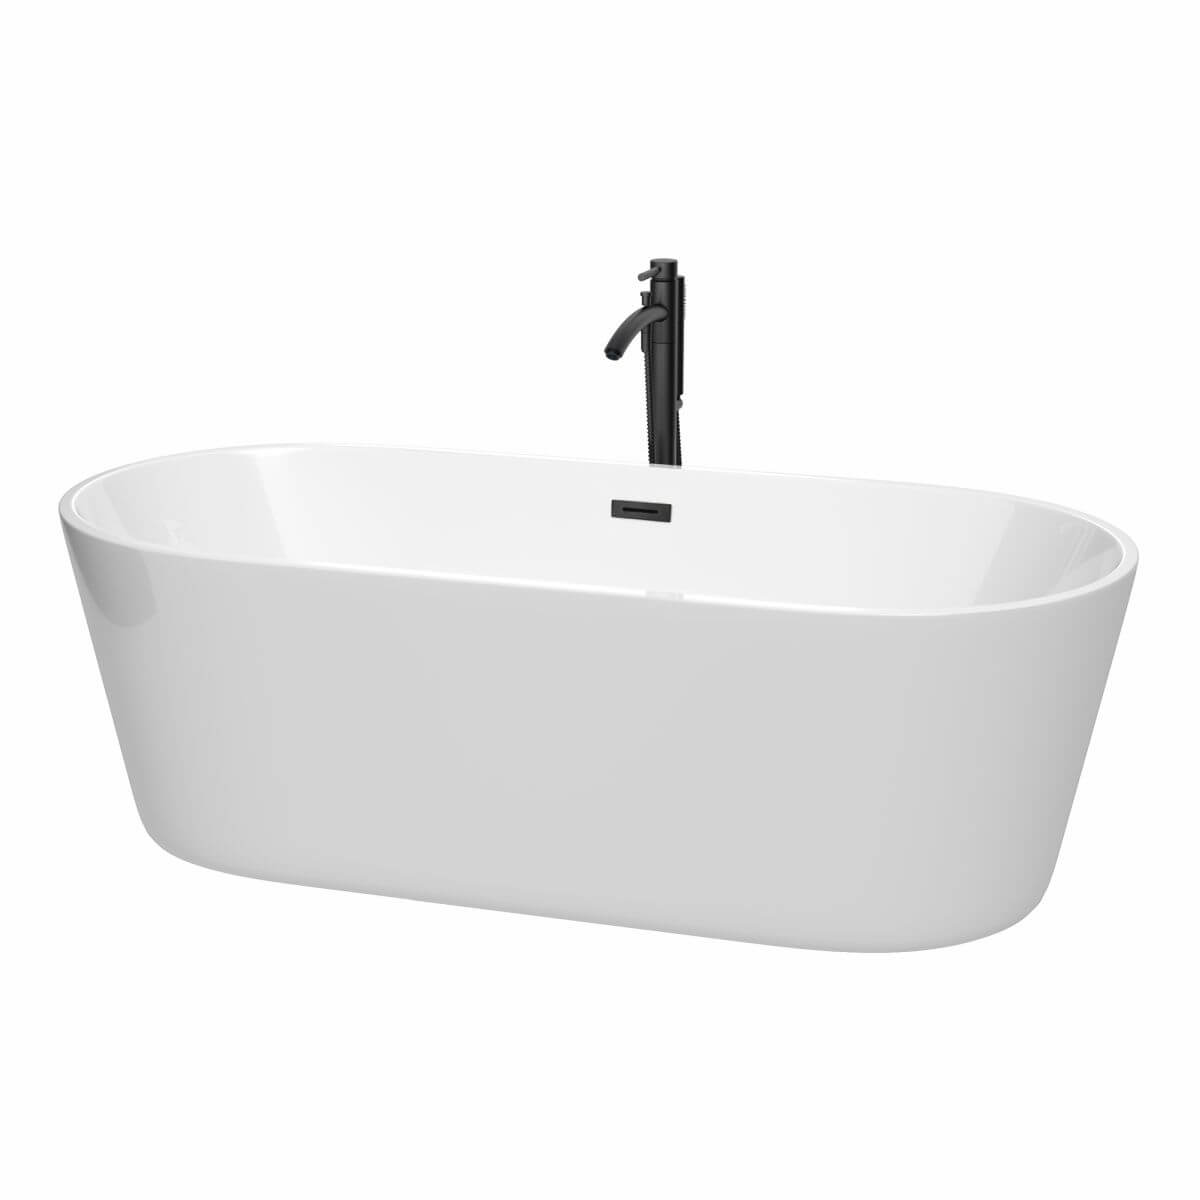 Wyndham Collection Carissa 71 inch Freestanding Bathtub in White with Floor Mounted Faucet, Drain and Overflow Trim in Matte Black - WCOBT101271MBATPBK